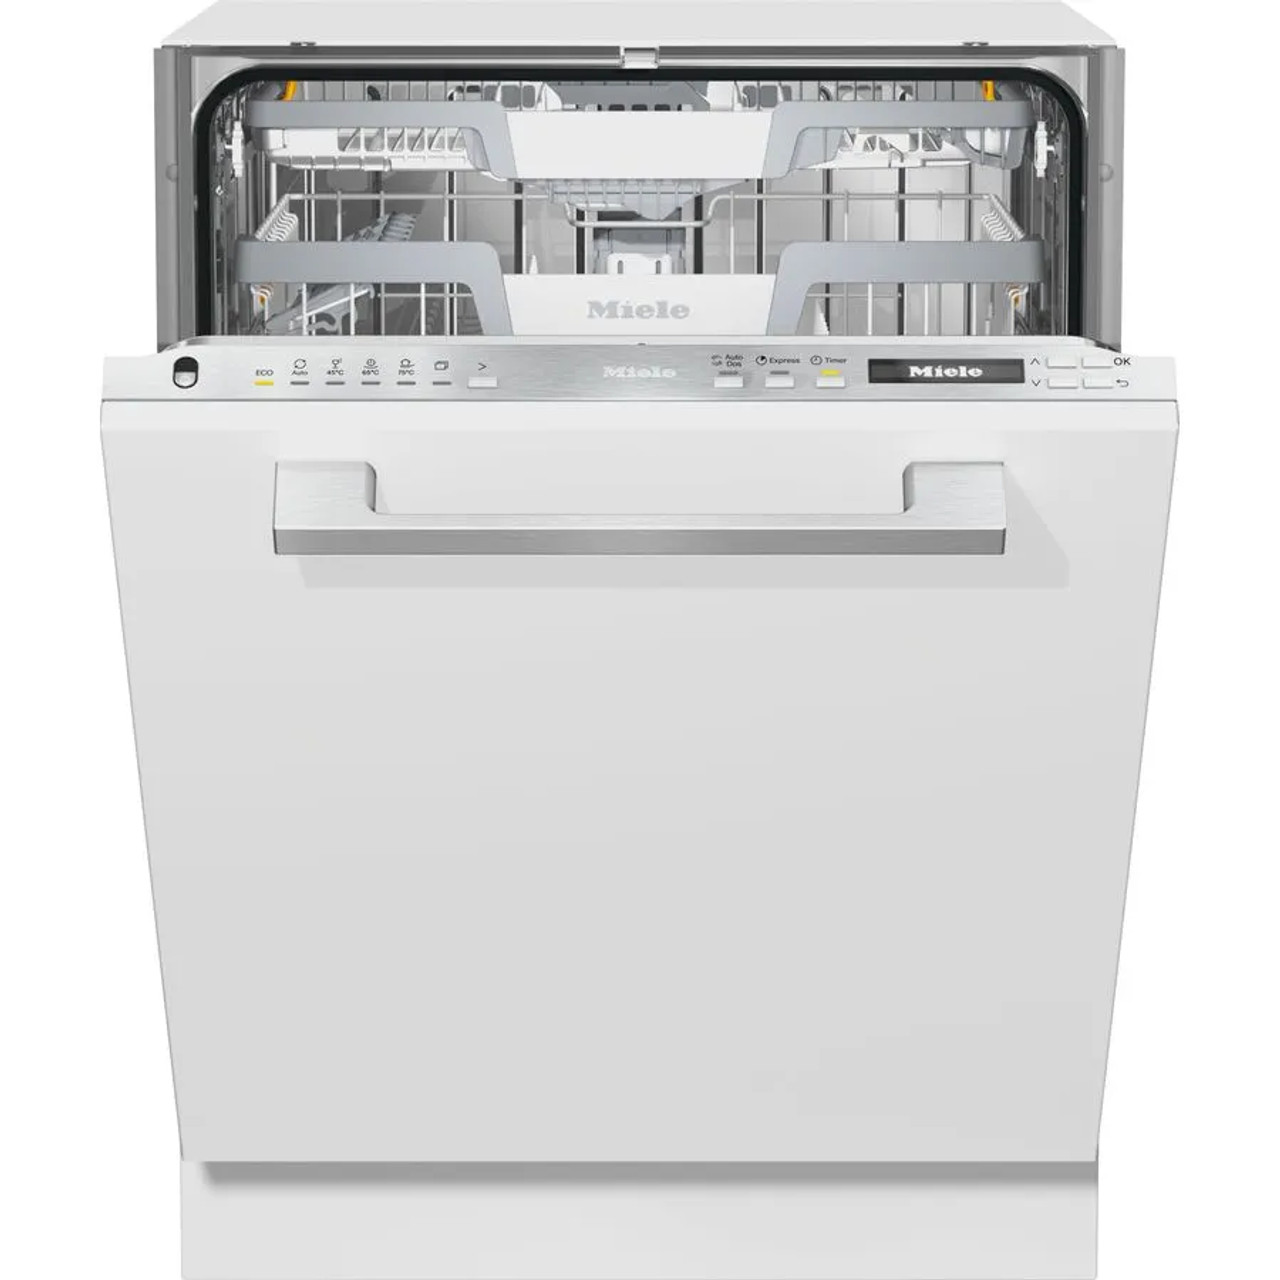 G7164SCVI - Cleansteel Fully Integrated Dishwasher With Autodos - Integrated